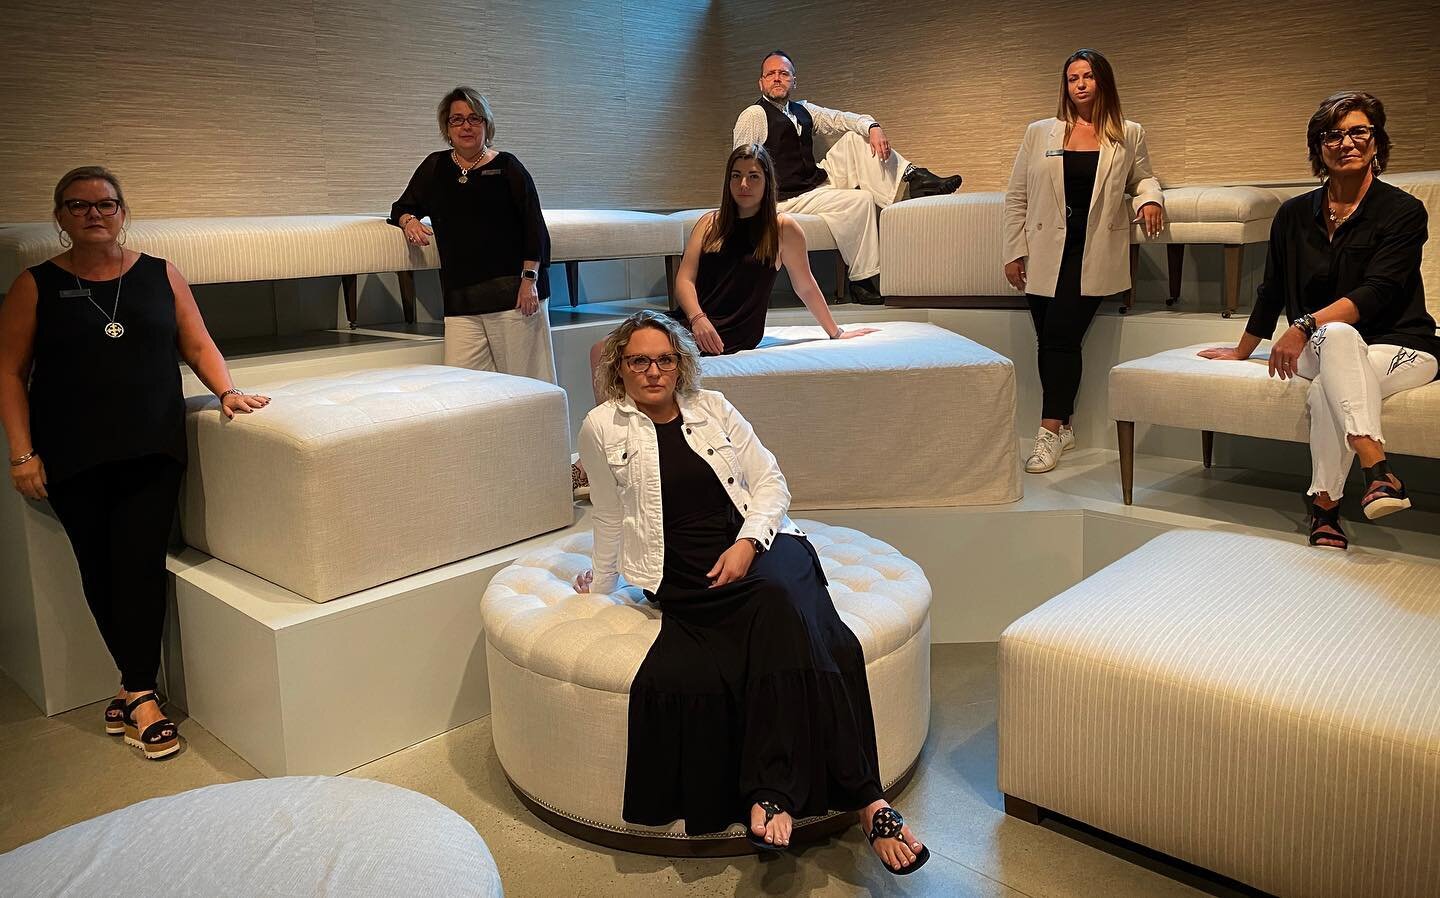 More showroom shenanigans&hellip;.when half your coworkers get the memo&hellip;.you have to send it out into insta-land!! #aereed #ae3theagency #lifewithae #lwae #hpmkt #aeabouttown @rowefinefurniture